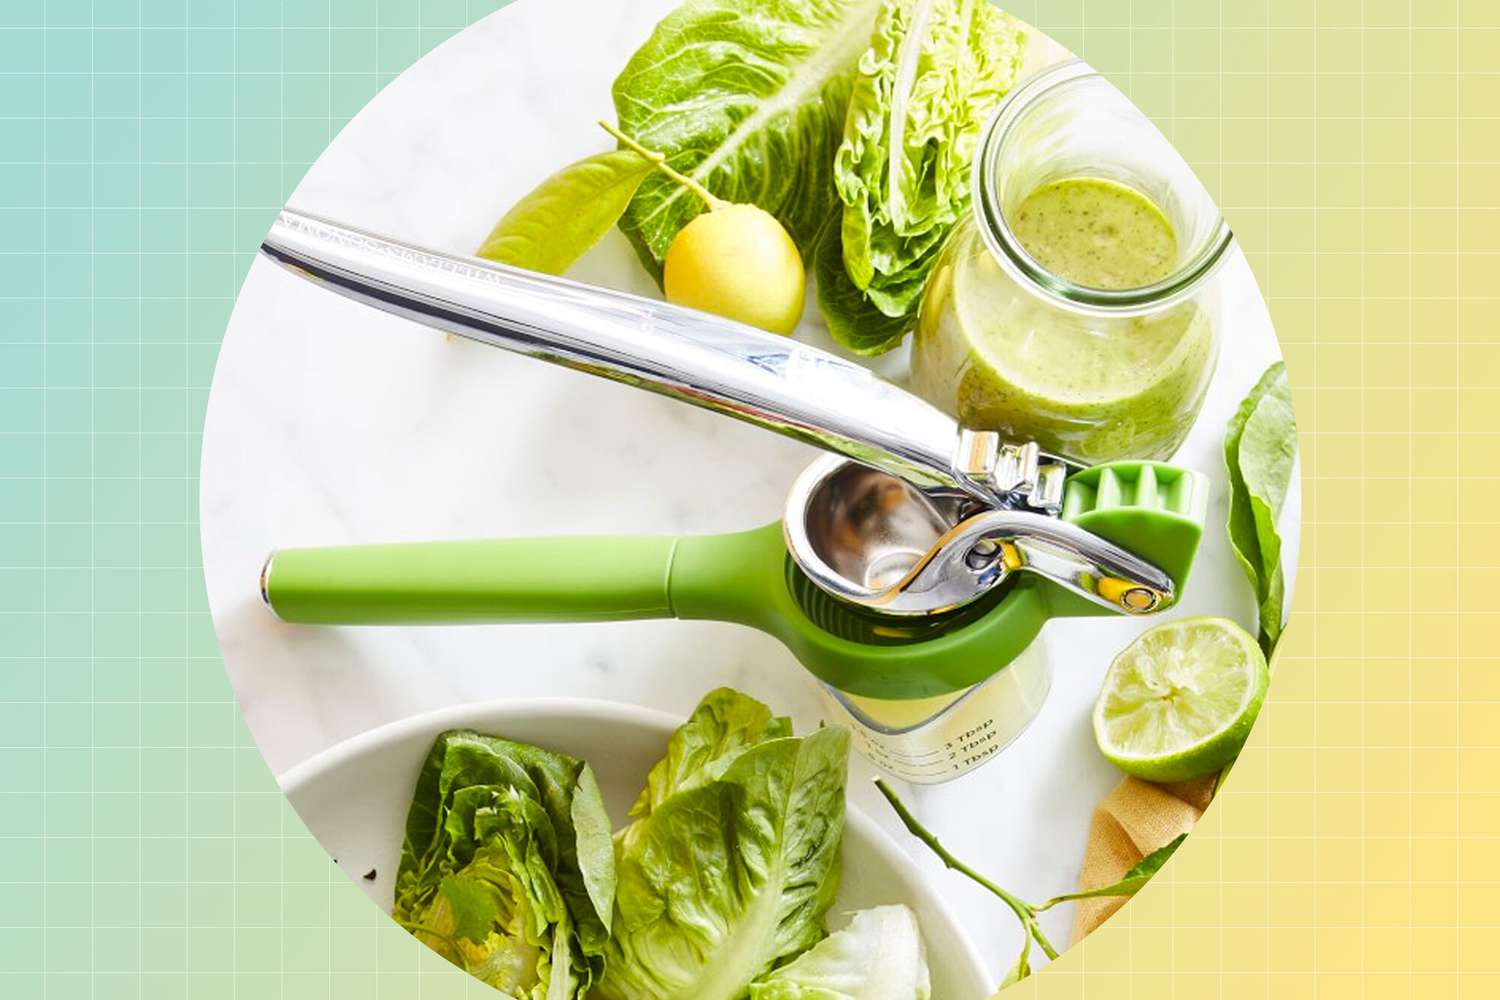 Metal and plastic lime press on a white counter with salad ingredients and a green dressing